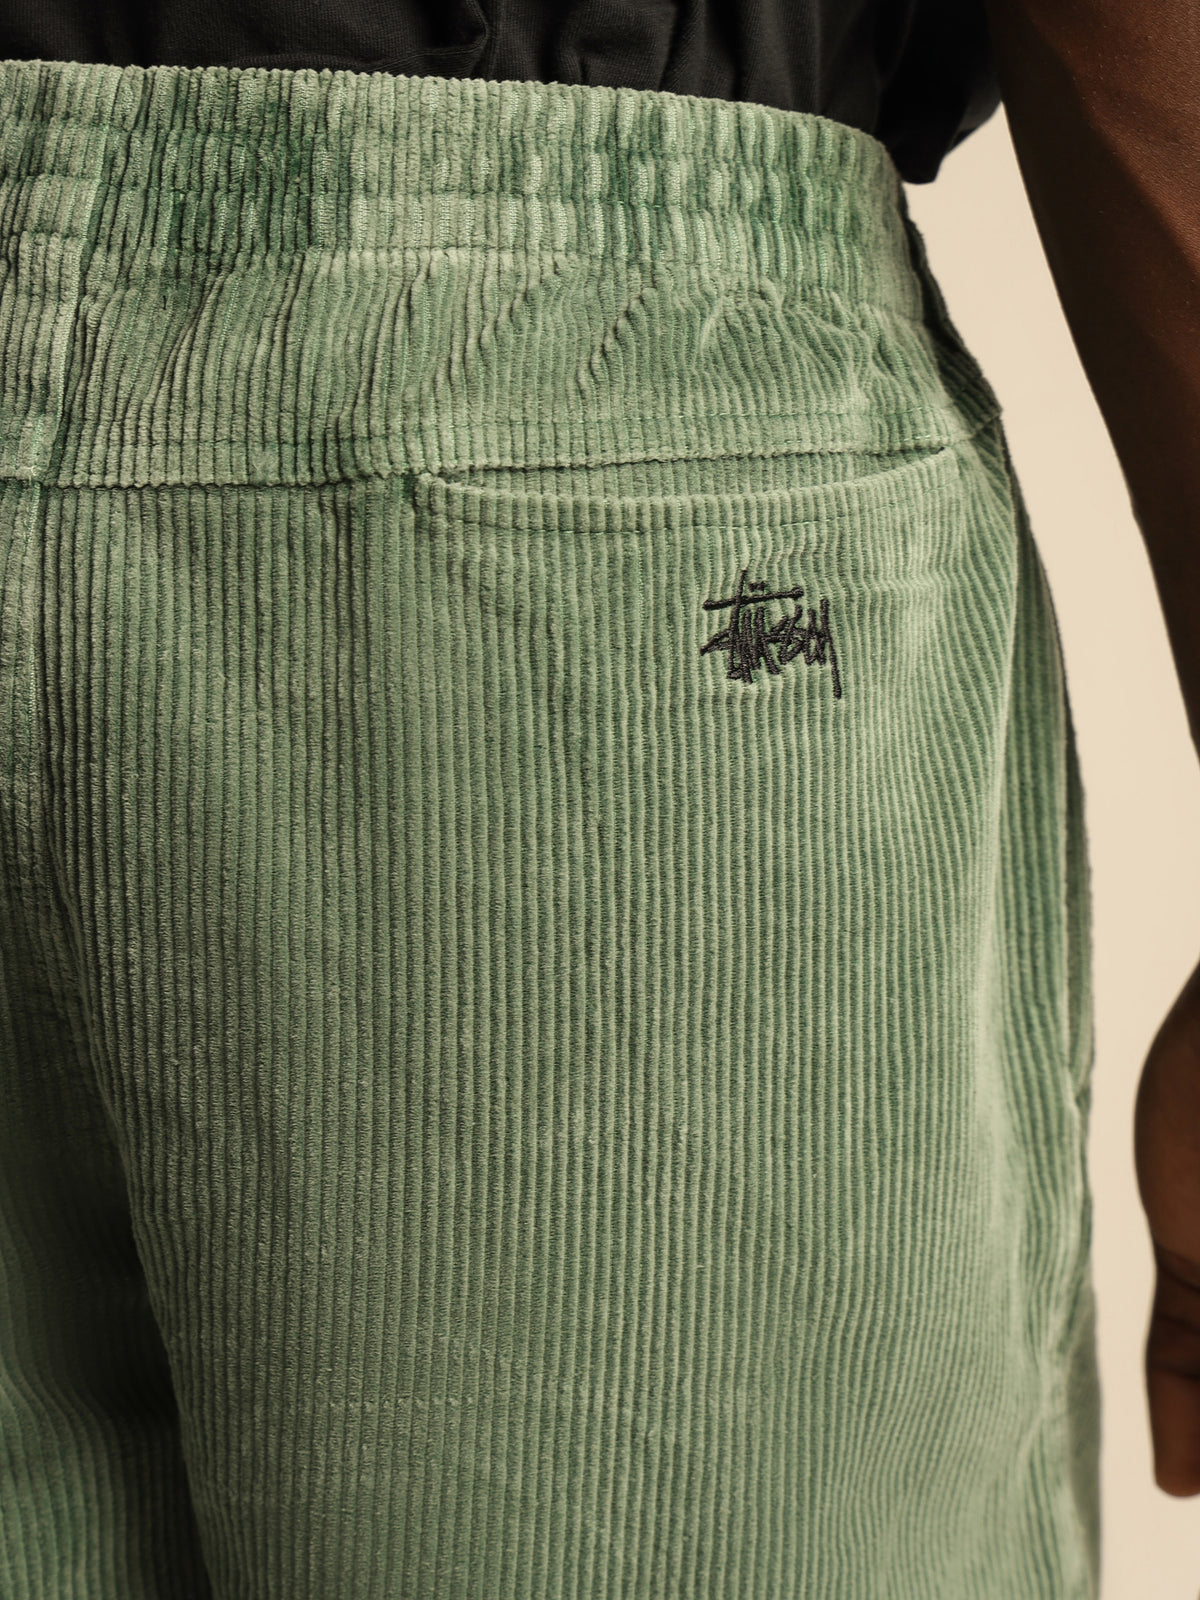 Wide Wale Cord Shorts in Forest Green